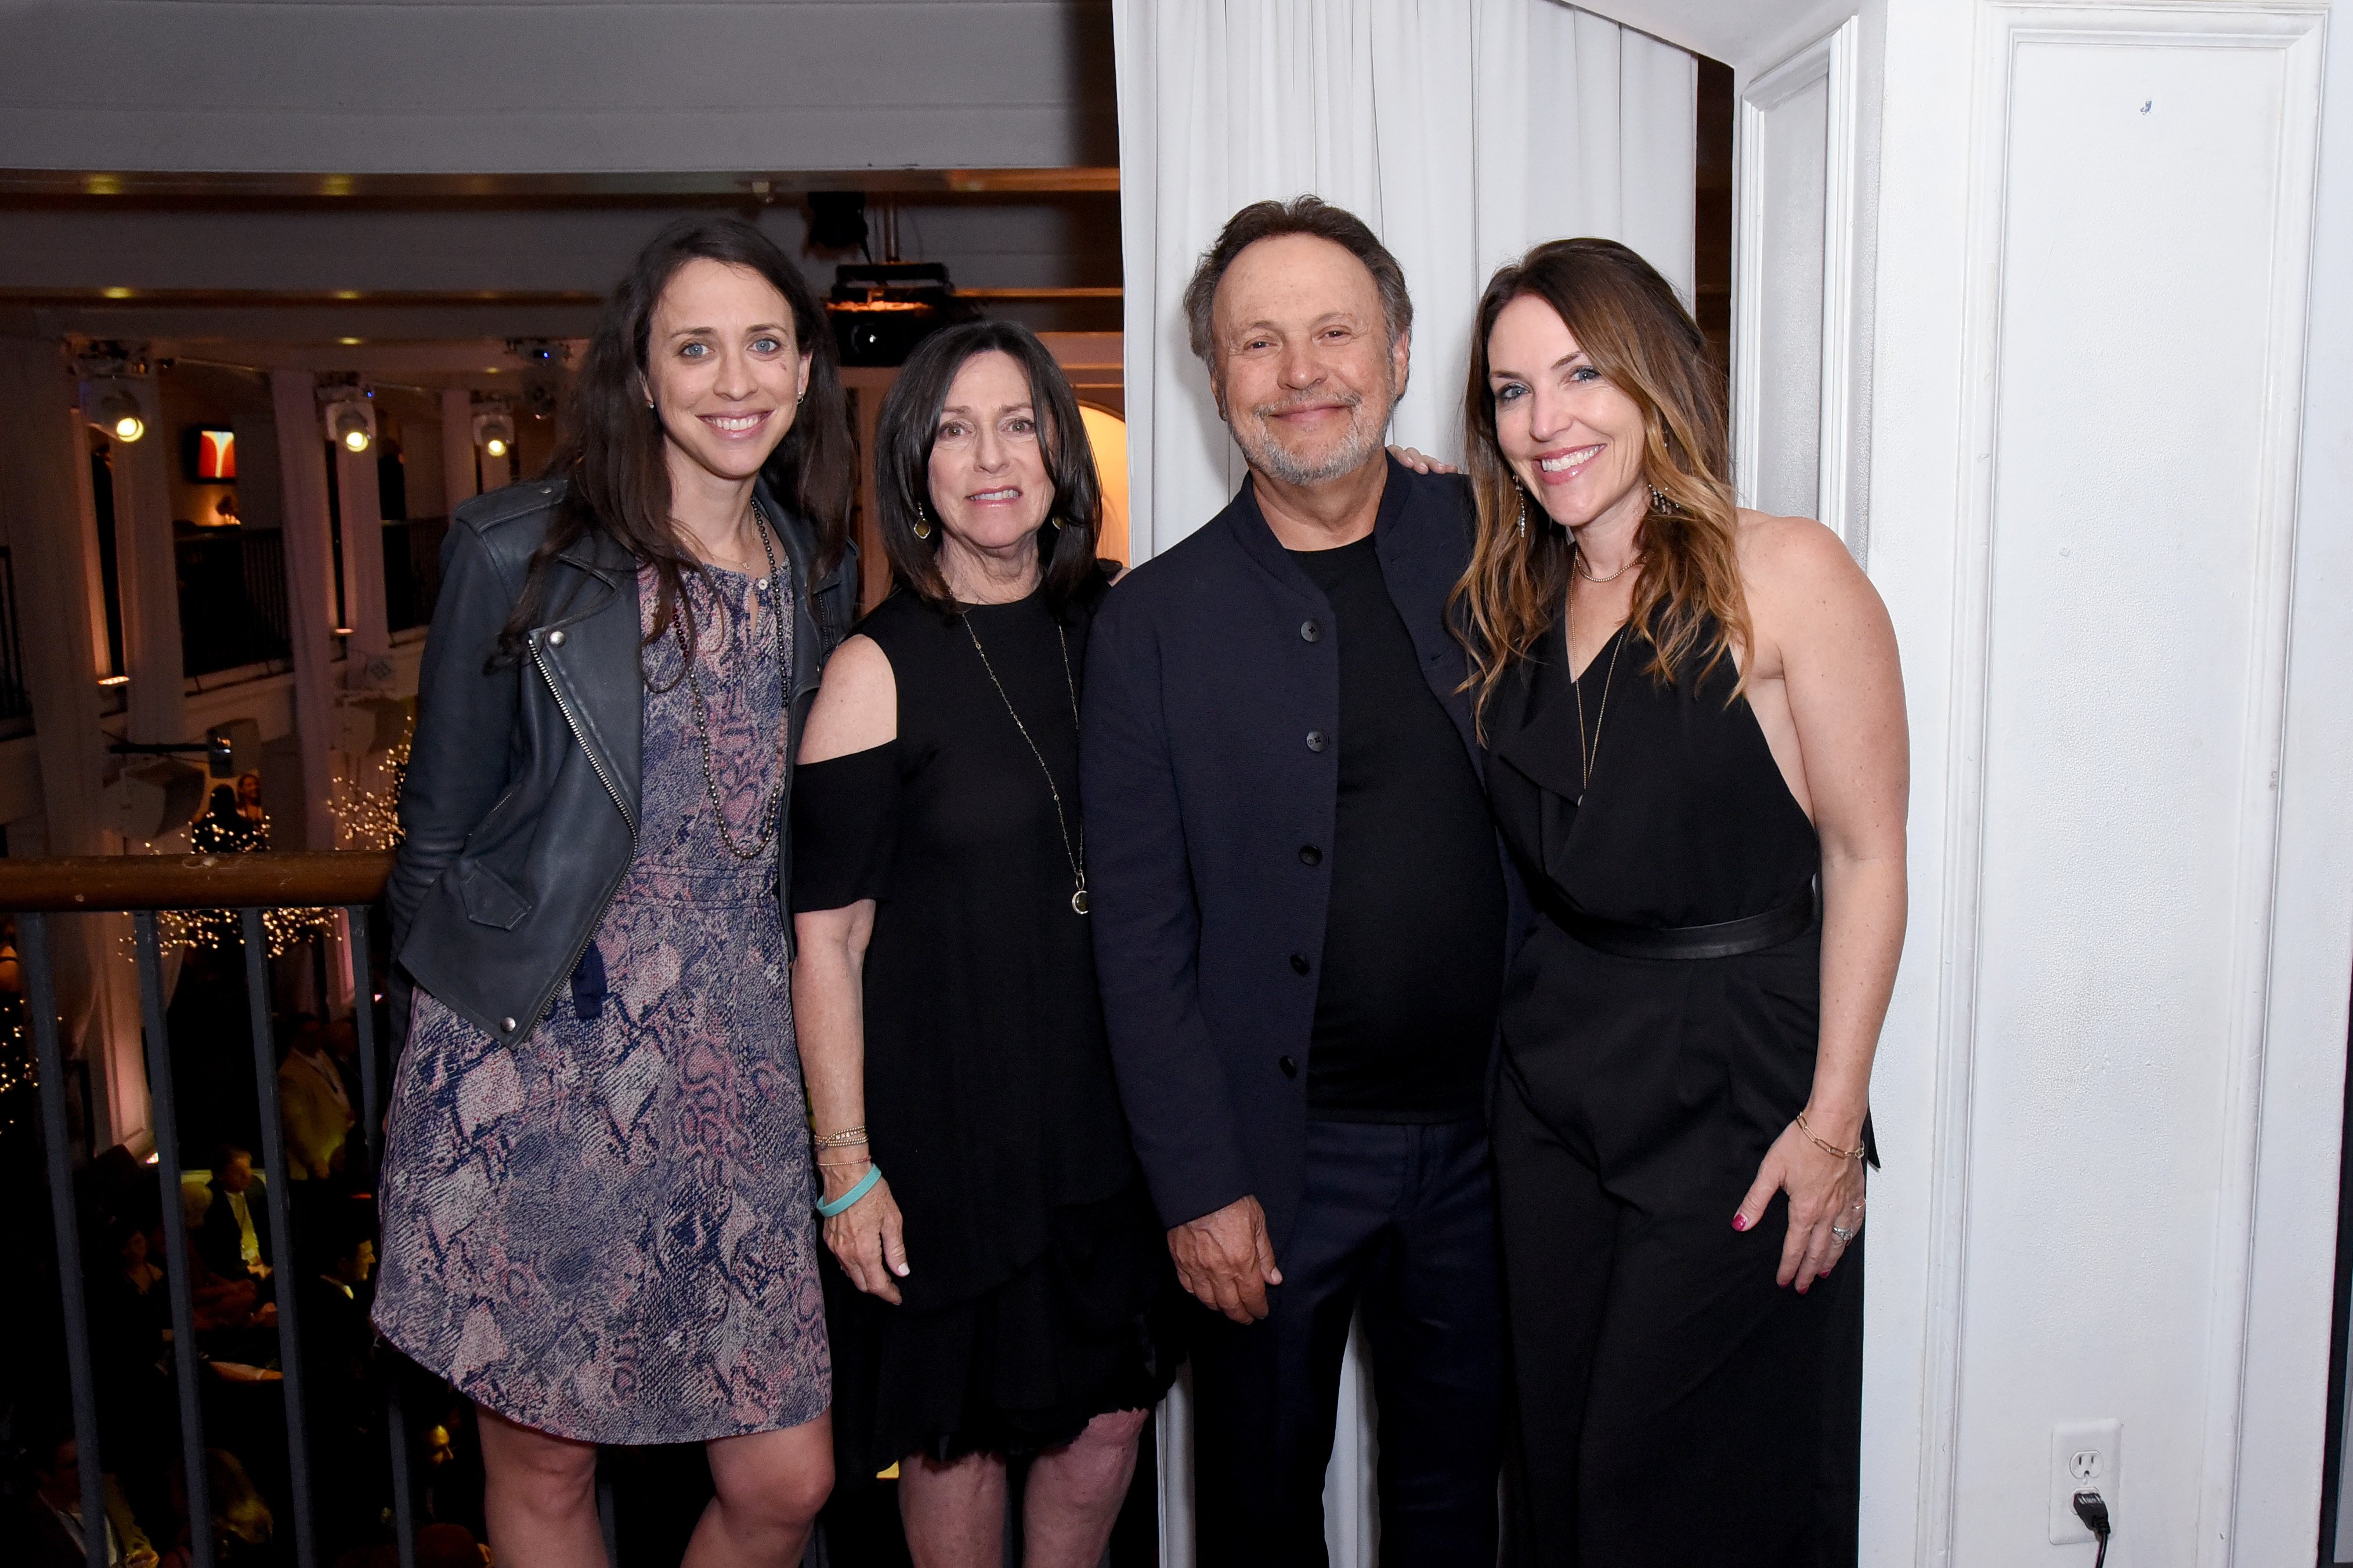 Lindsay Crystal, Janice Crystal, Billy Crystal, and Jennifer Crystal on April 11, 2019 in Hollywood, California | Source: Getty Images